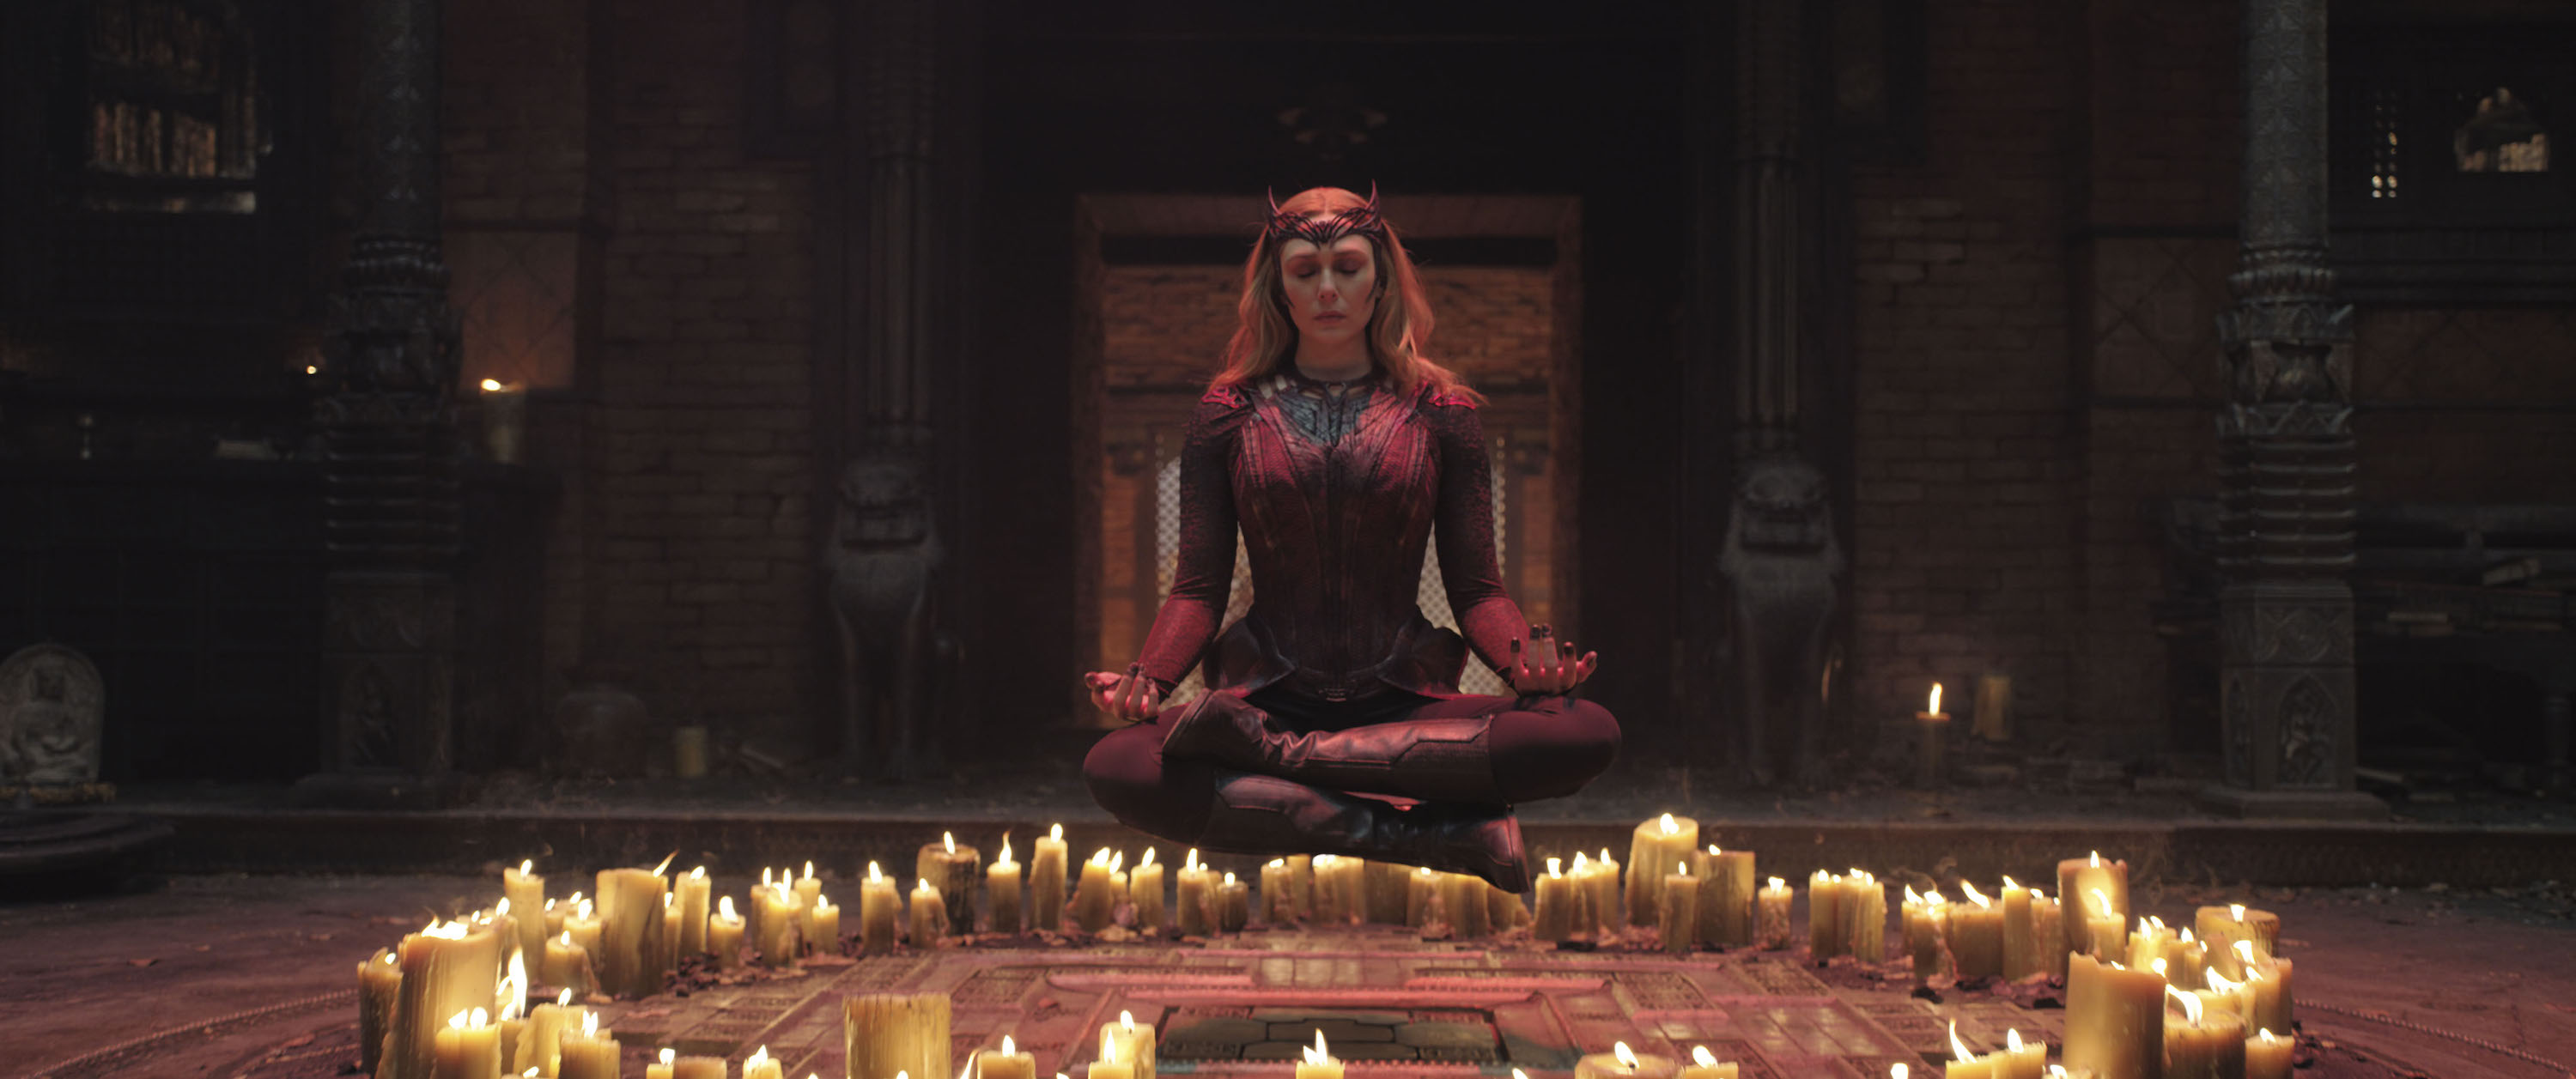 Elizabeth Olsen as Wanda Maximoff floats in the air in lotus position, eyes closed, above a circle of candles in Doctor Strange in the Multiverse of Madness.